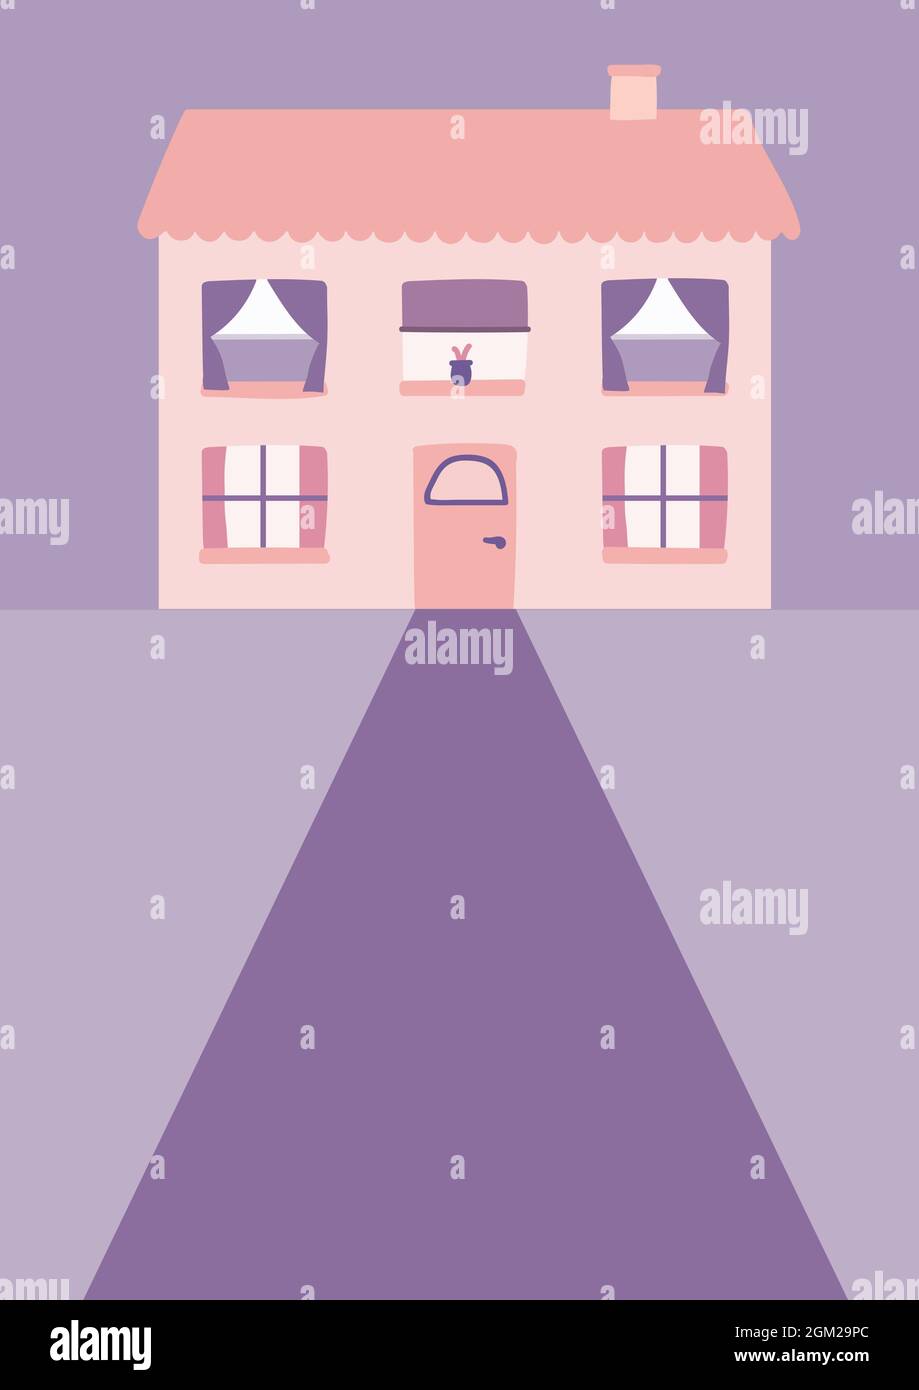 Digitally generated image of house icon against purple background Stock Photo